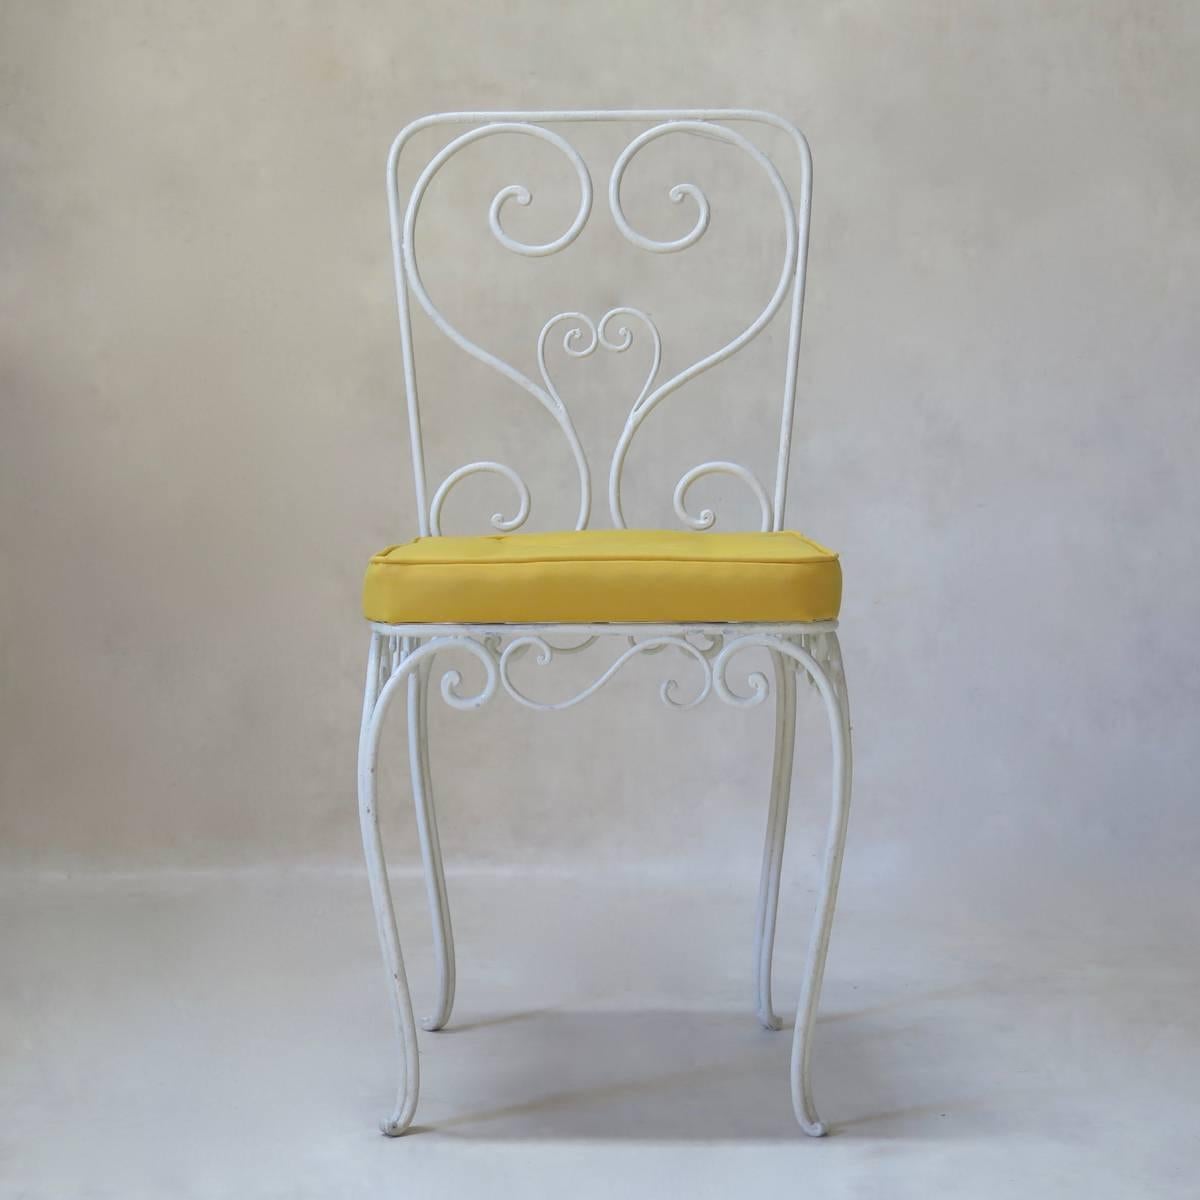 Very elegant set comprising two chairs and two armchairs, made of wrought iron, with scrolling and curlicue motifs, raised on cabriole legs. Seats in bright, yellow canvas (outdoors).

Dimensions provided below are for the armchairs. The chairs